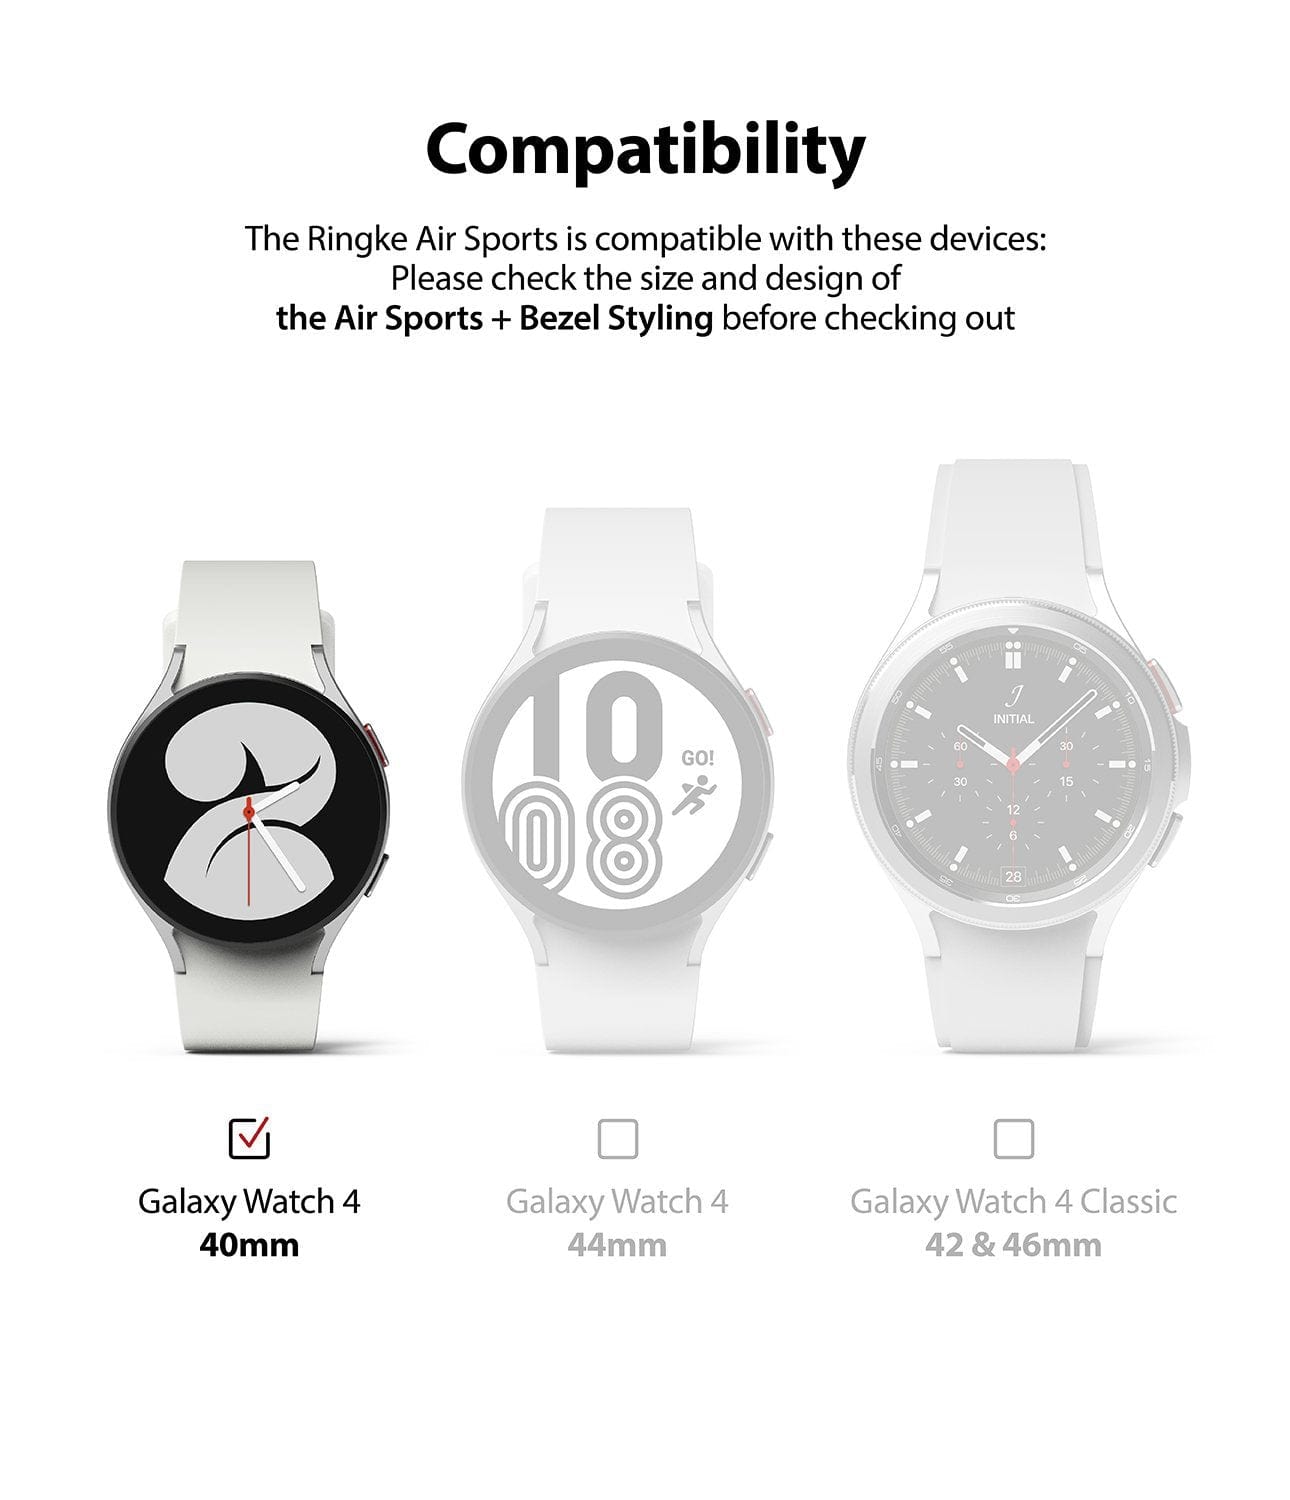 Yes, the Ringke Air Sport case is fully compatible with the Air Sport + Bezel for the Galaxy Watch 4 40mm, ensuring a seamless fit and enhanced protection for your device.